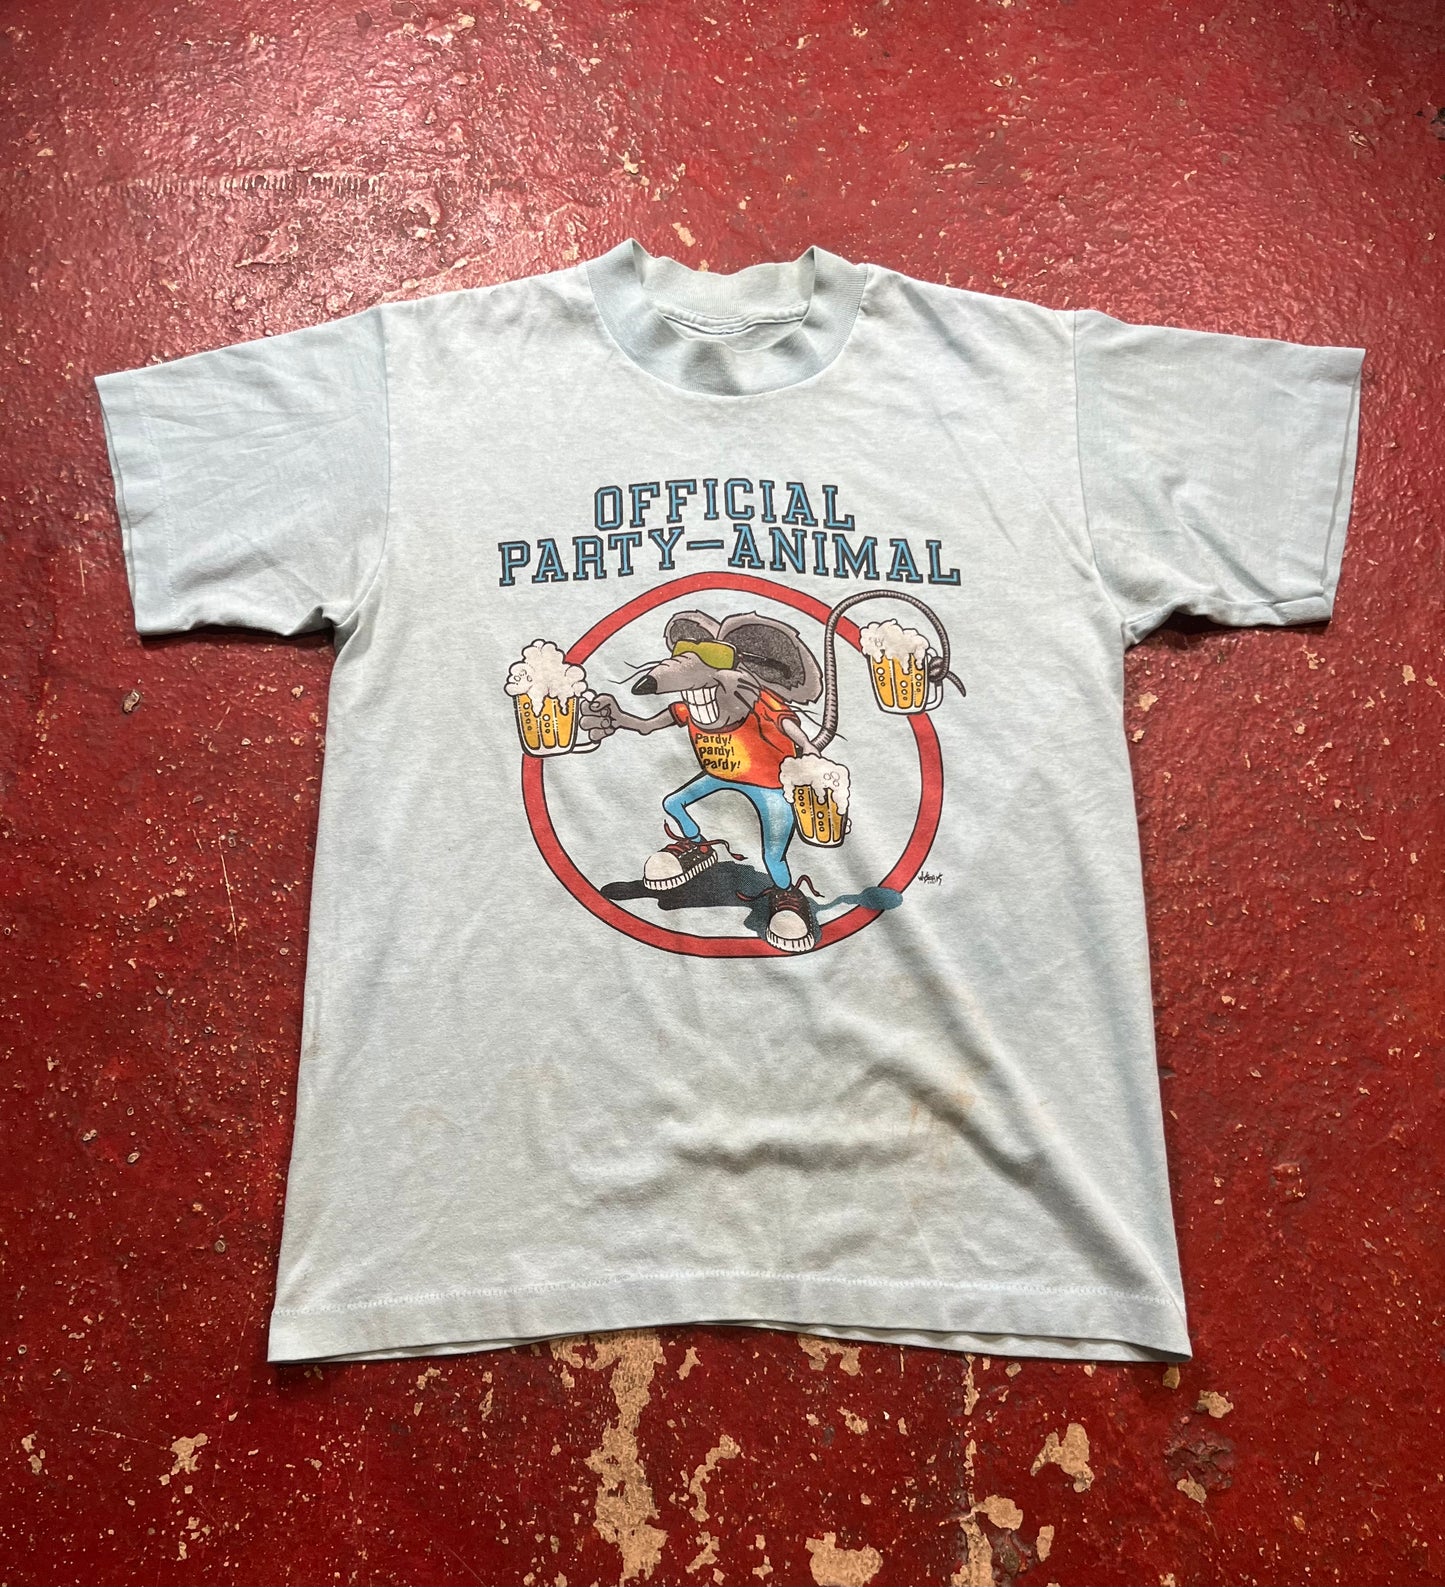 80s Party Animal Tee